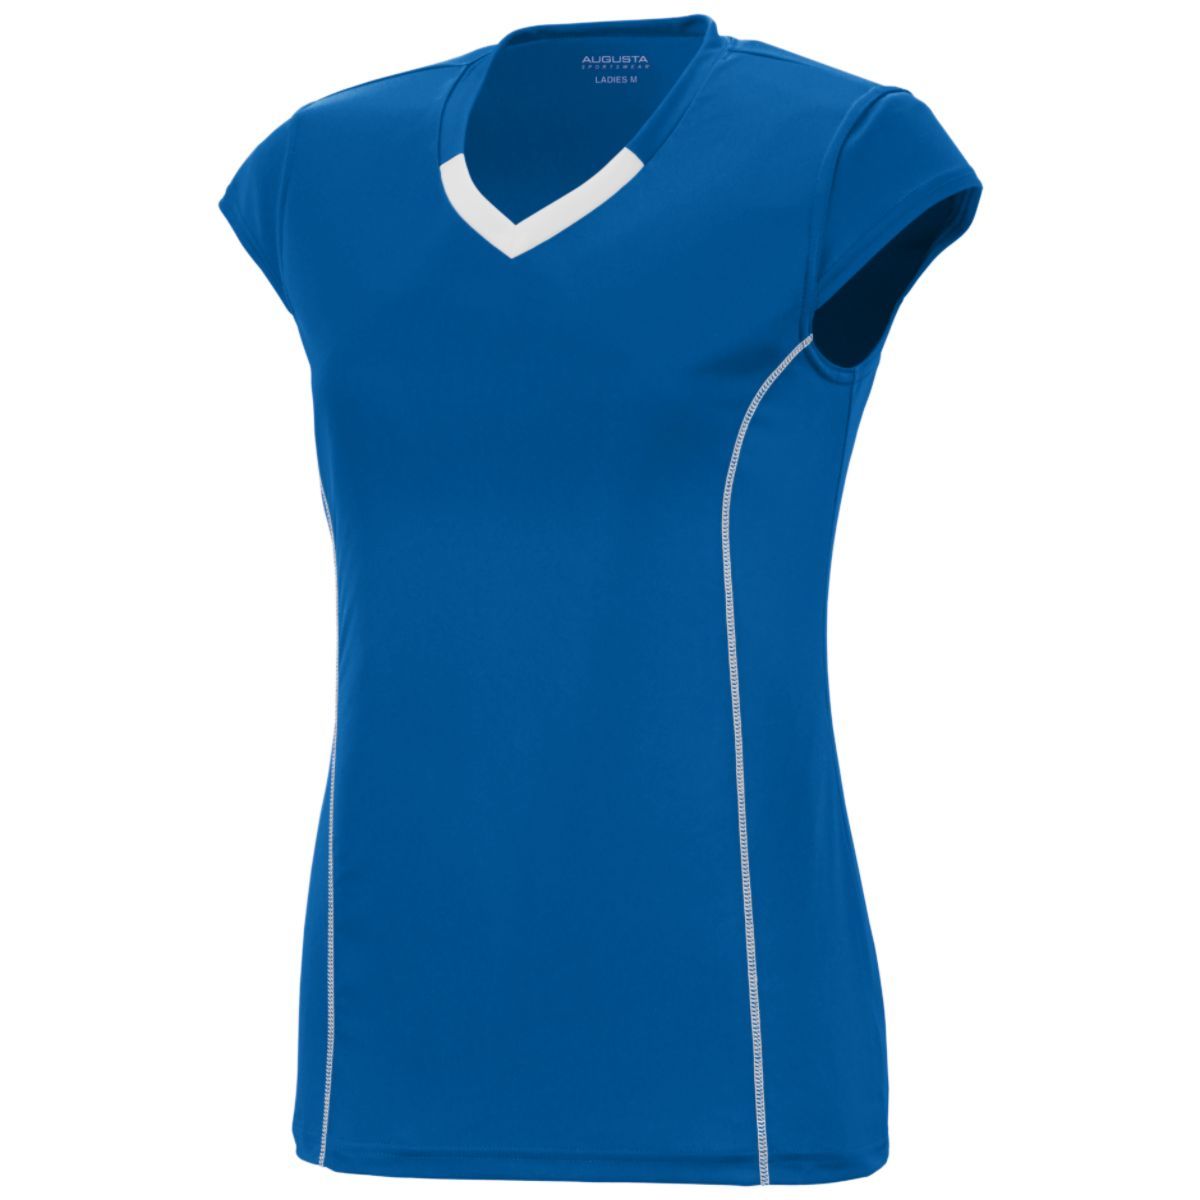 Augusta Sportswear Girls Blash Jersey in Royal/White  -Part of the Girls, Augusta-Products, Volleyball, Girls-Jersey, Shirts product lines at KanaleyCreations.com